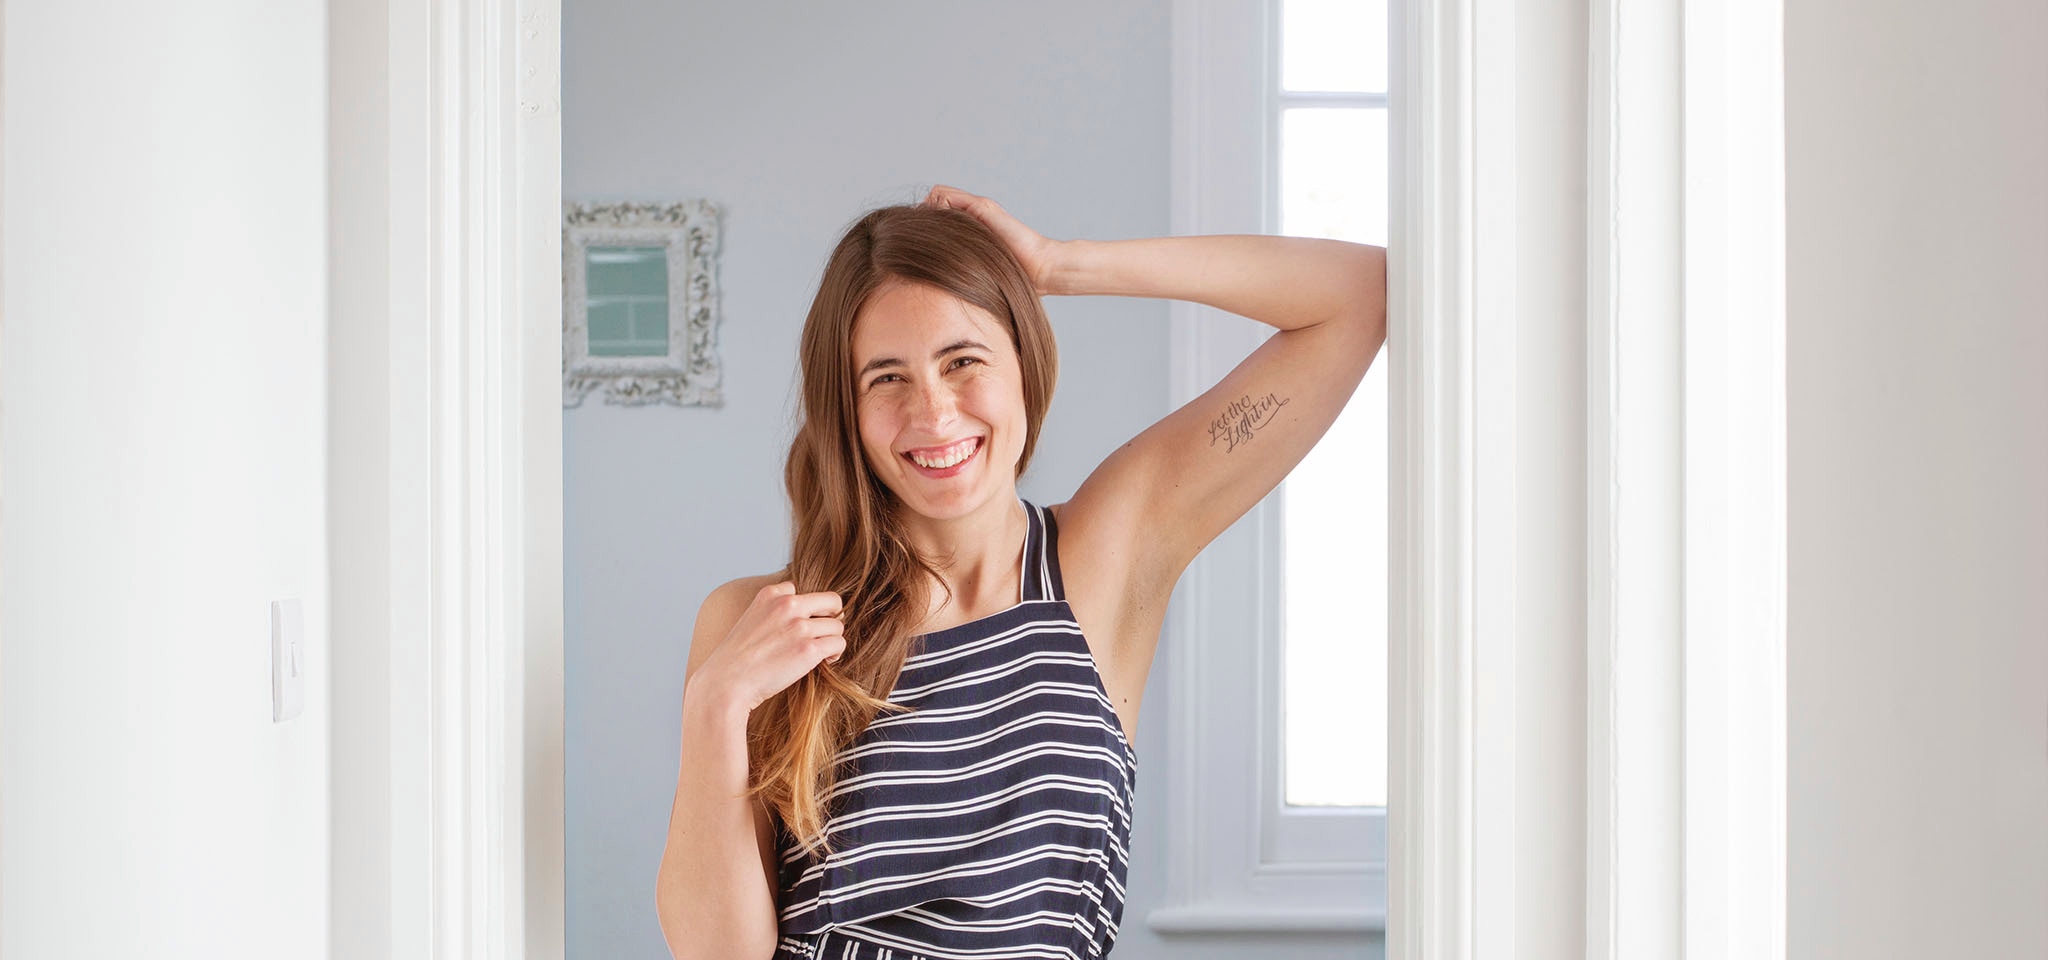 Woman wearing dress with long hair smilingly with one arm up